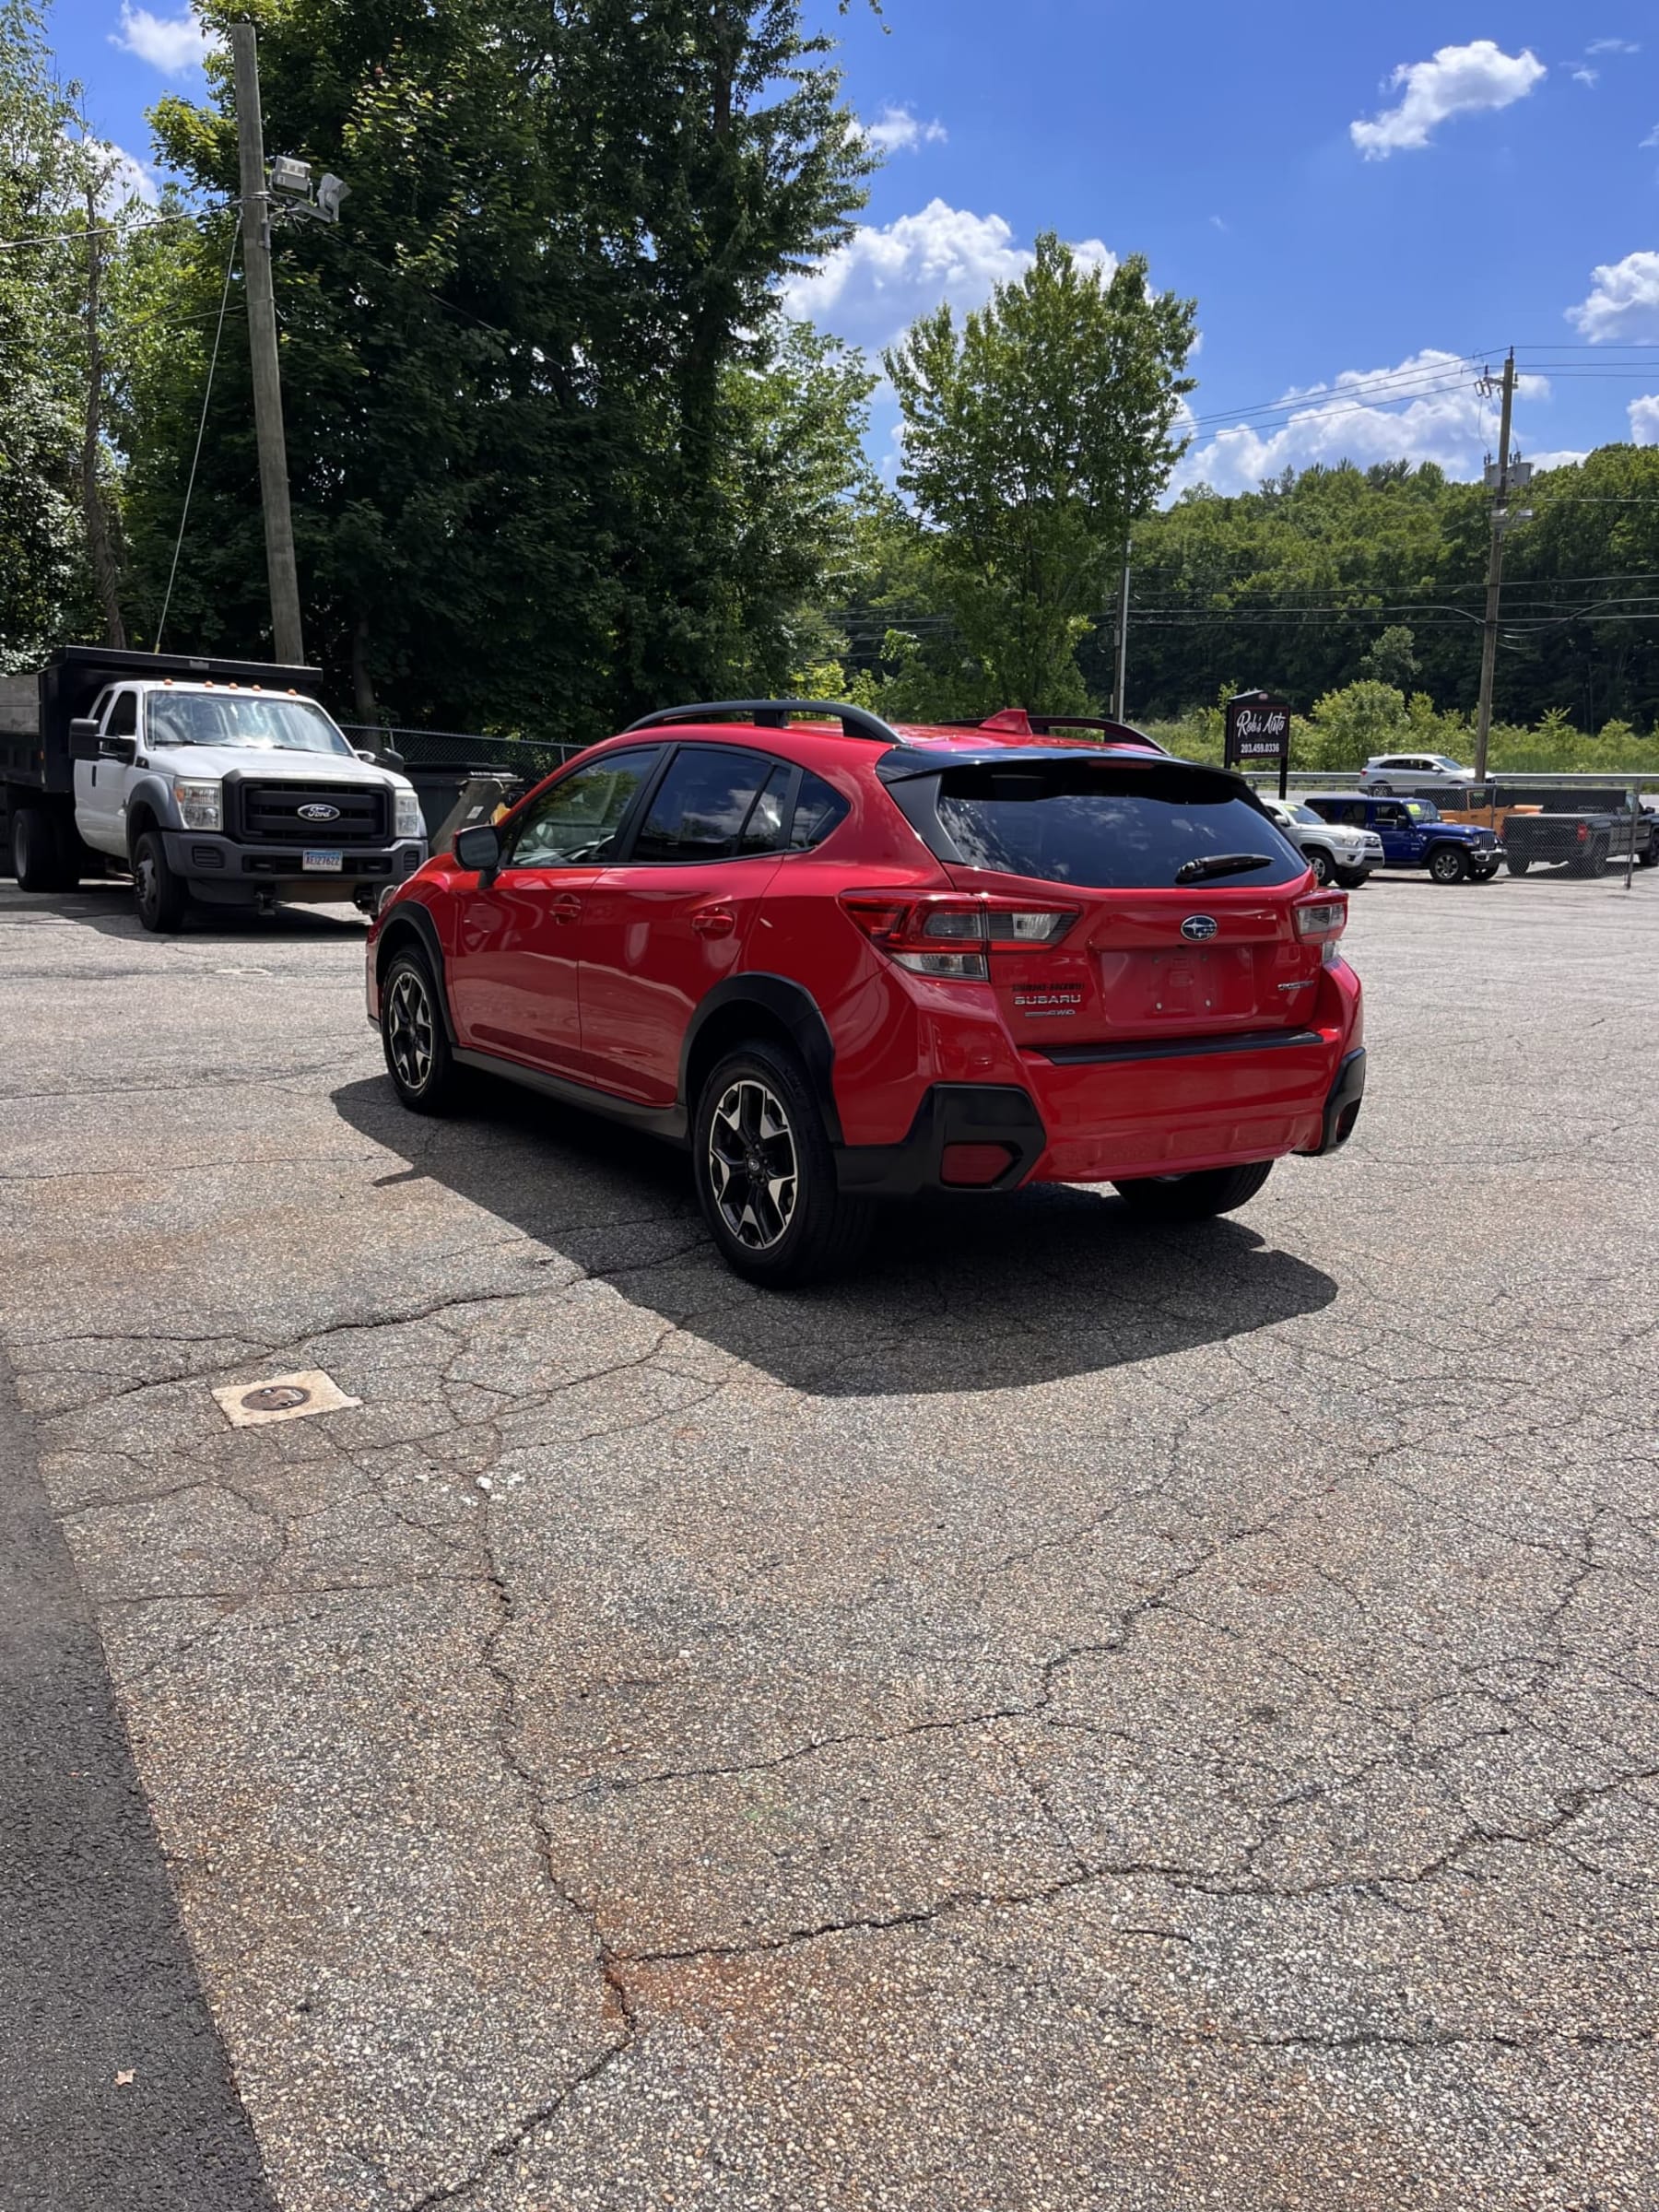 NEW ARRIVAL!! 2020 Subaru Crosstrek Premium!! One owner car!! Clean carfax!! AWD! Heated seats, backup camera, Apple CarPlay, lane departure warning, Bluetooth and much much more! ONLY 60,000 miles! Runs and Drives New!! Won’t last at $22,900!